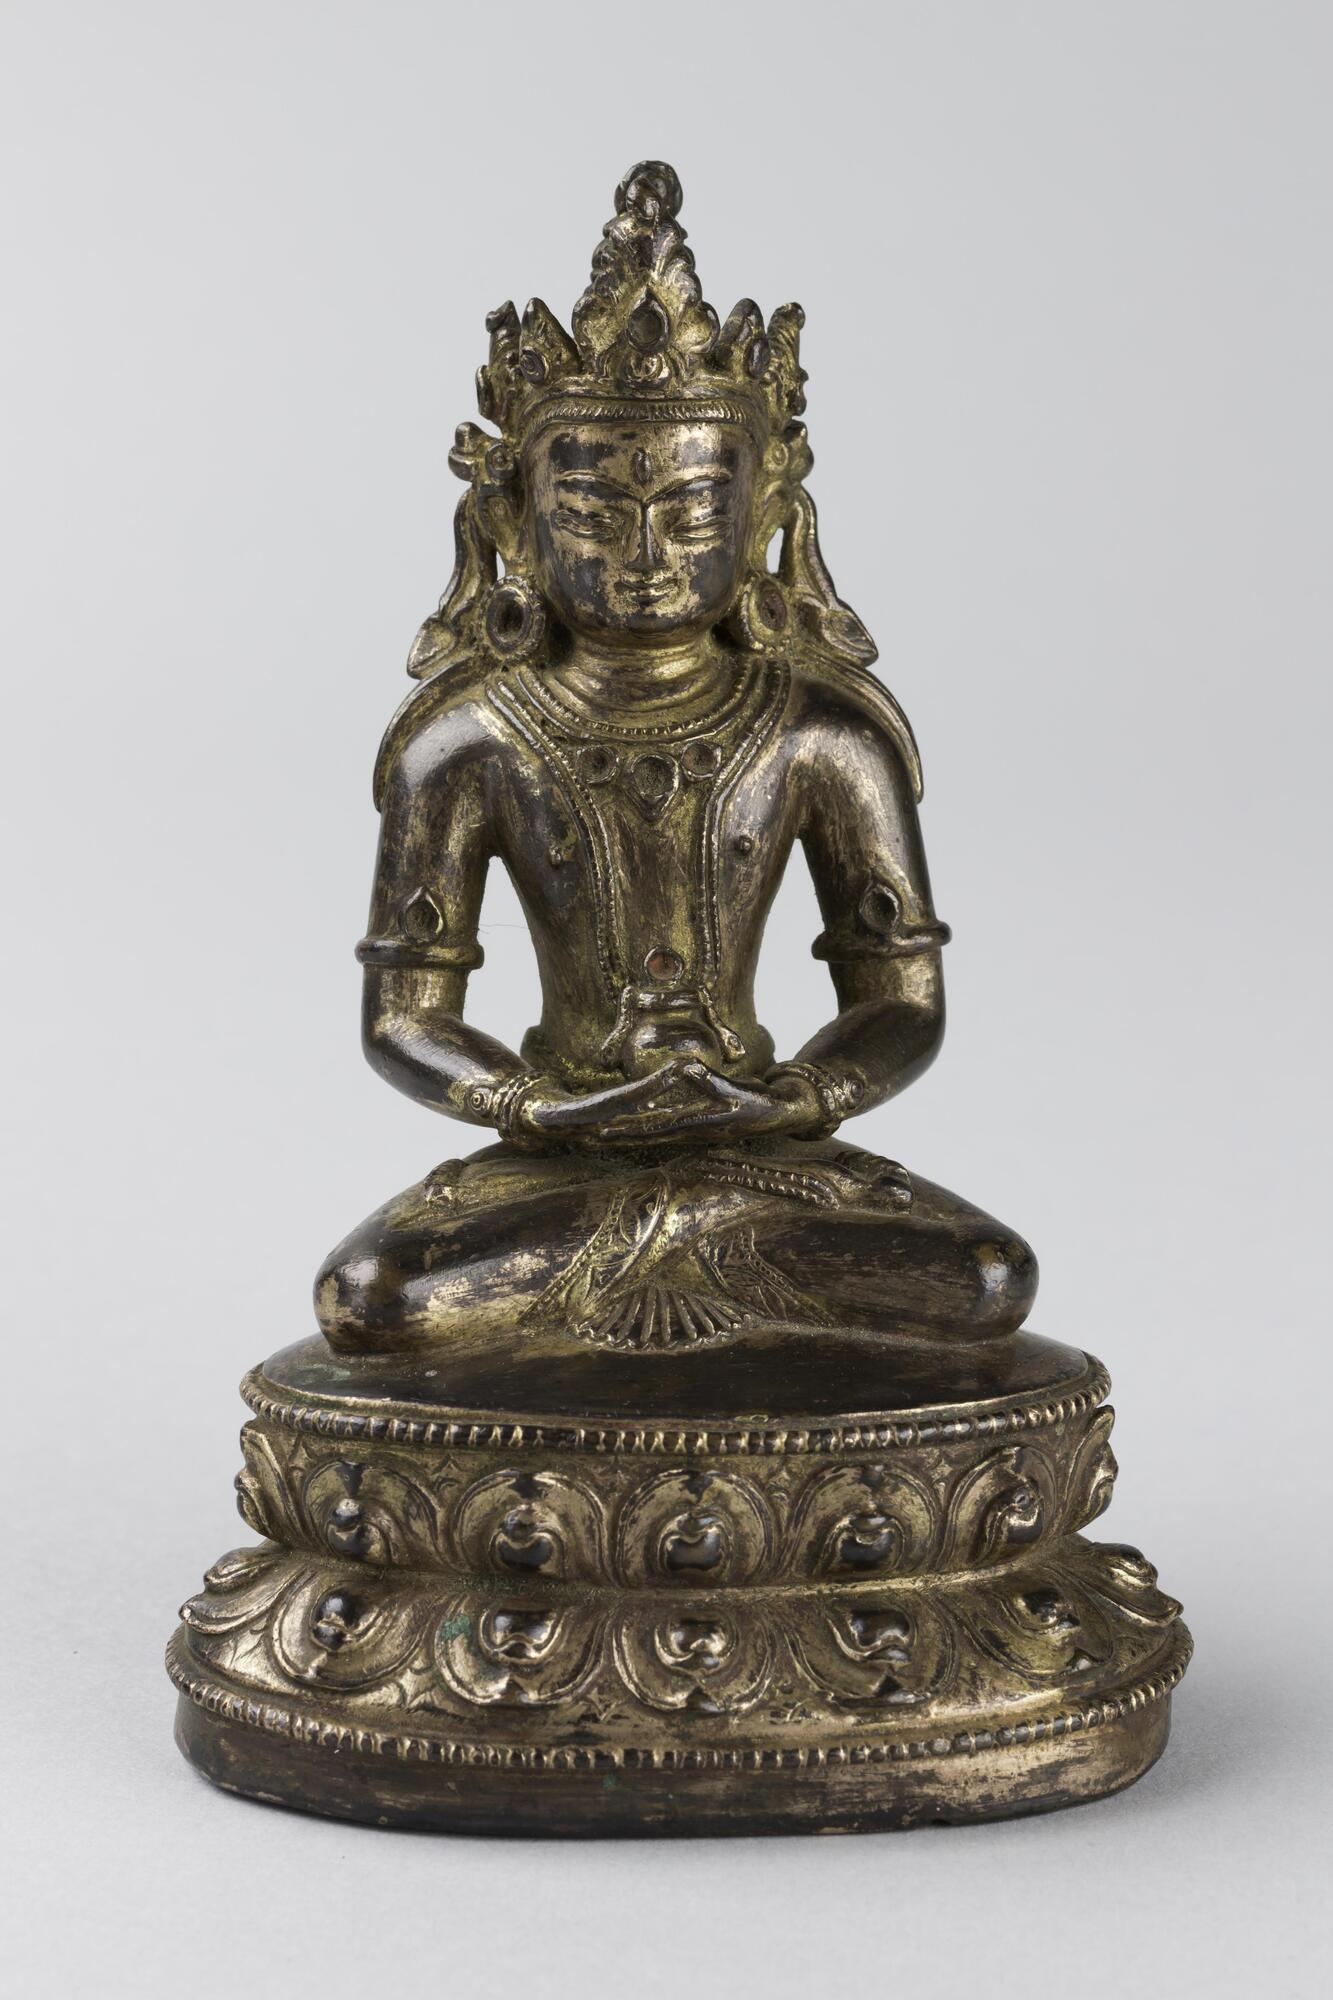 A finely cast miniature icon of the Buddha Amit&acirc;yus, seated on a double lotus pedestal.